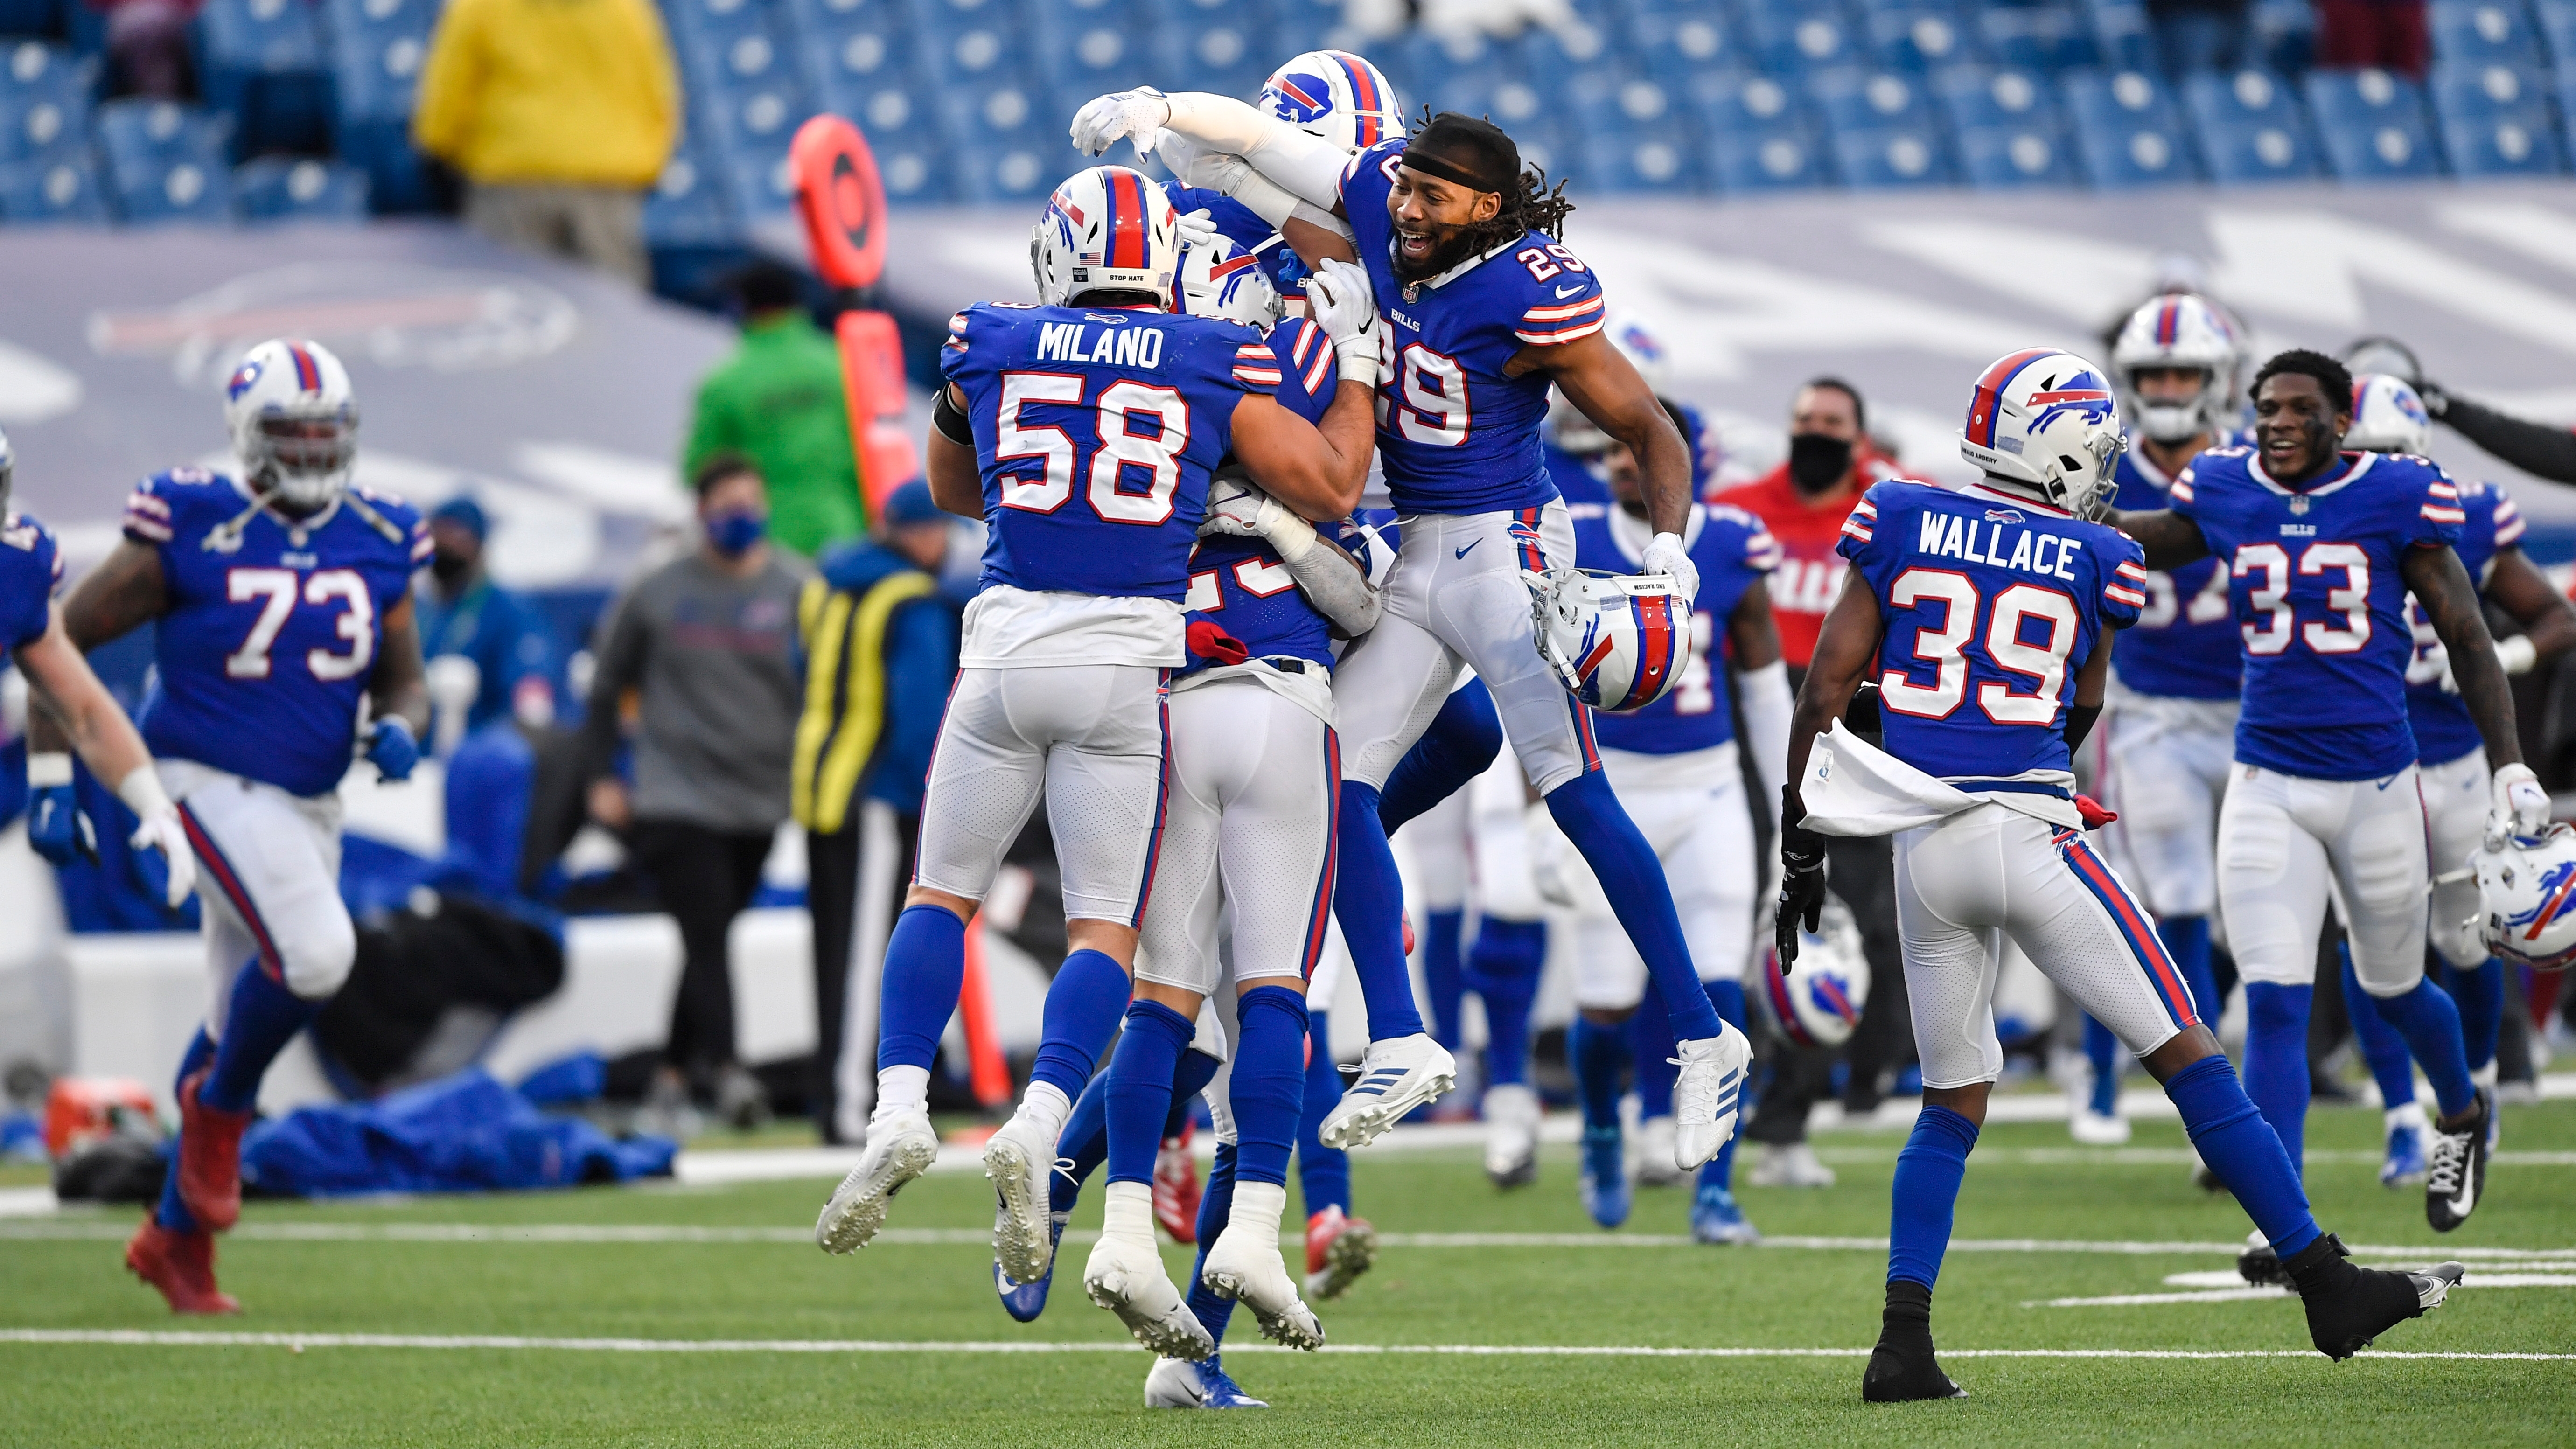 Bills beat Colts for first playoff win in 25 years